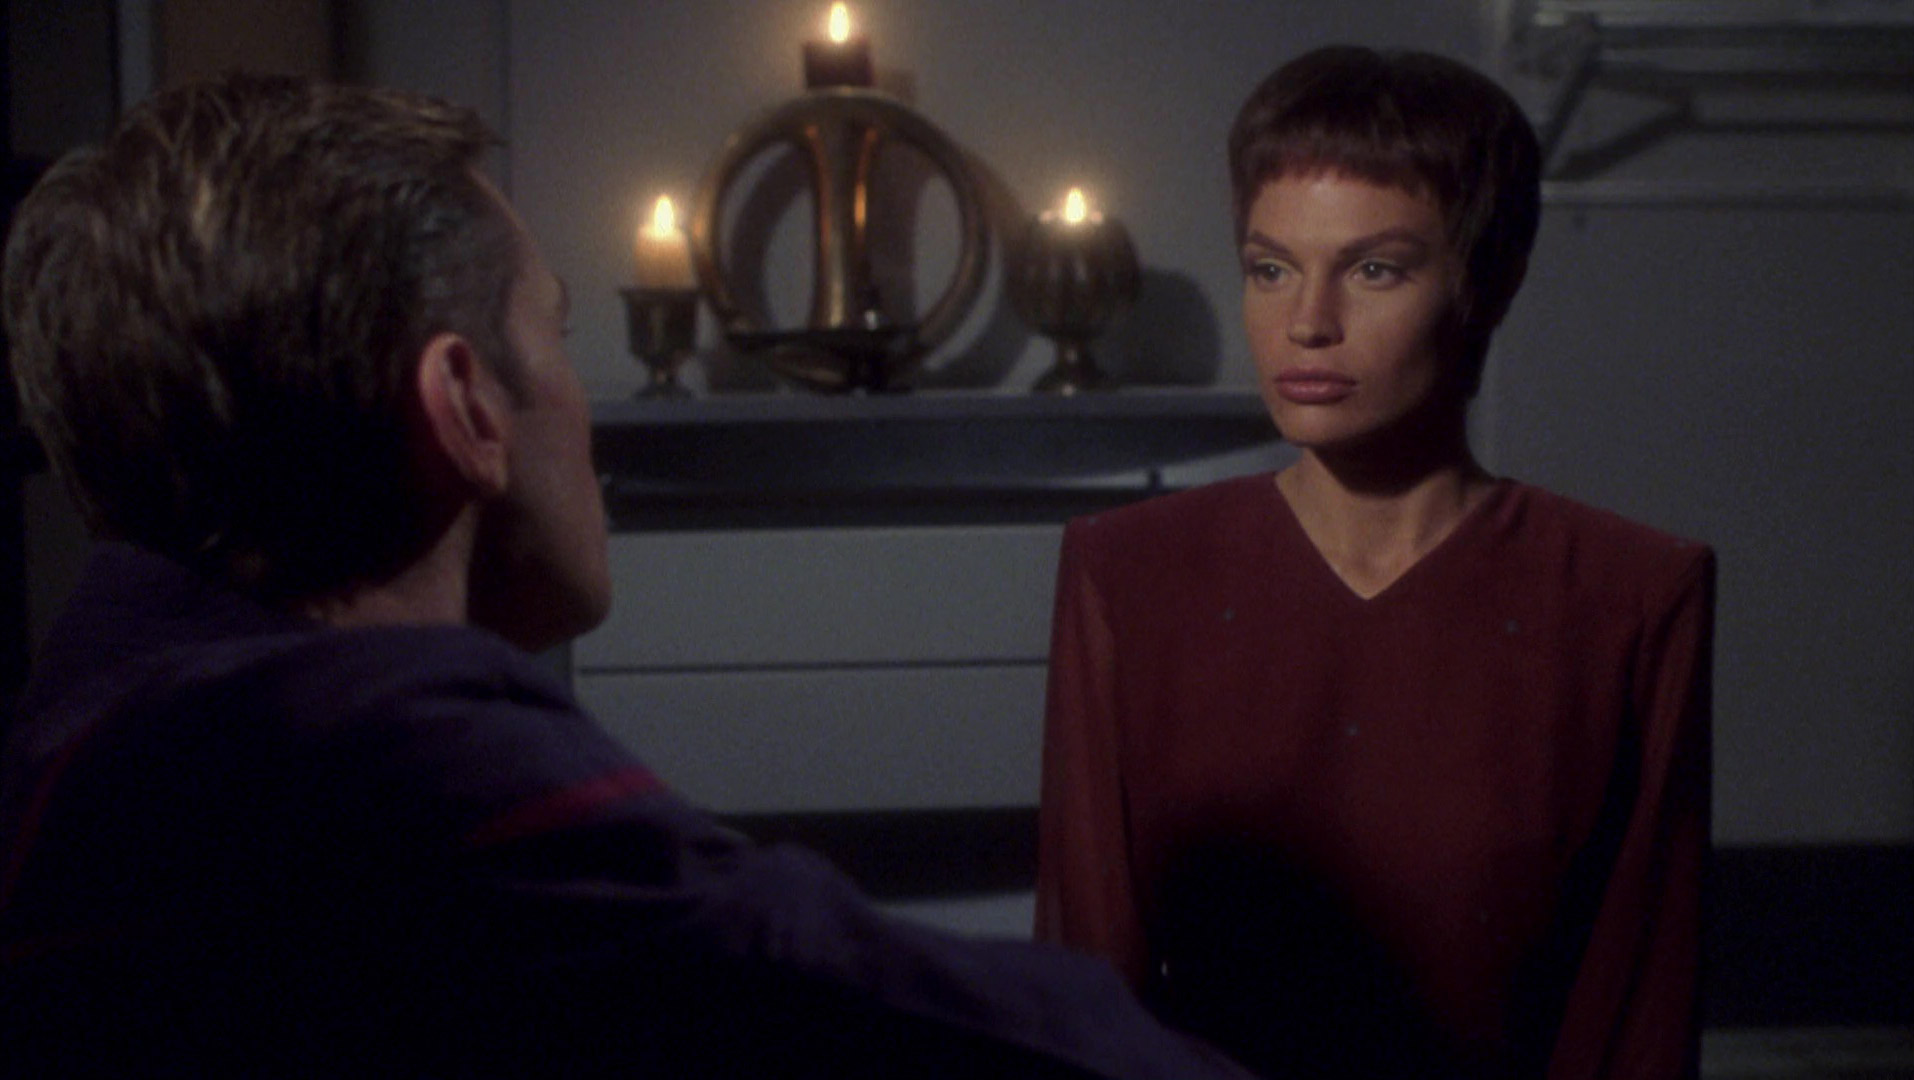 Trip speaks with T'Pol in her quarters